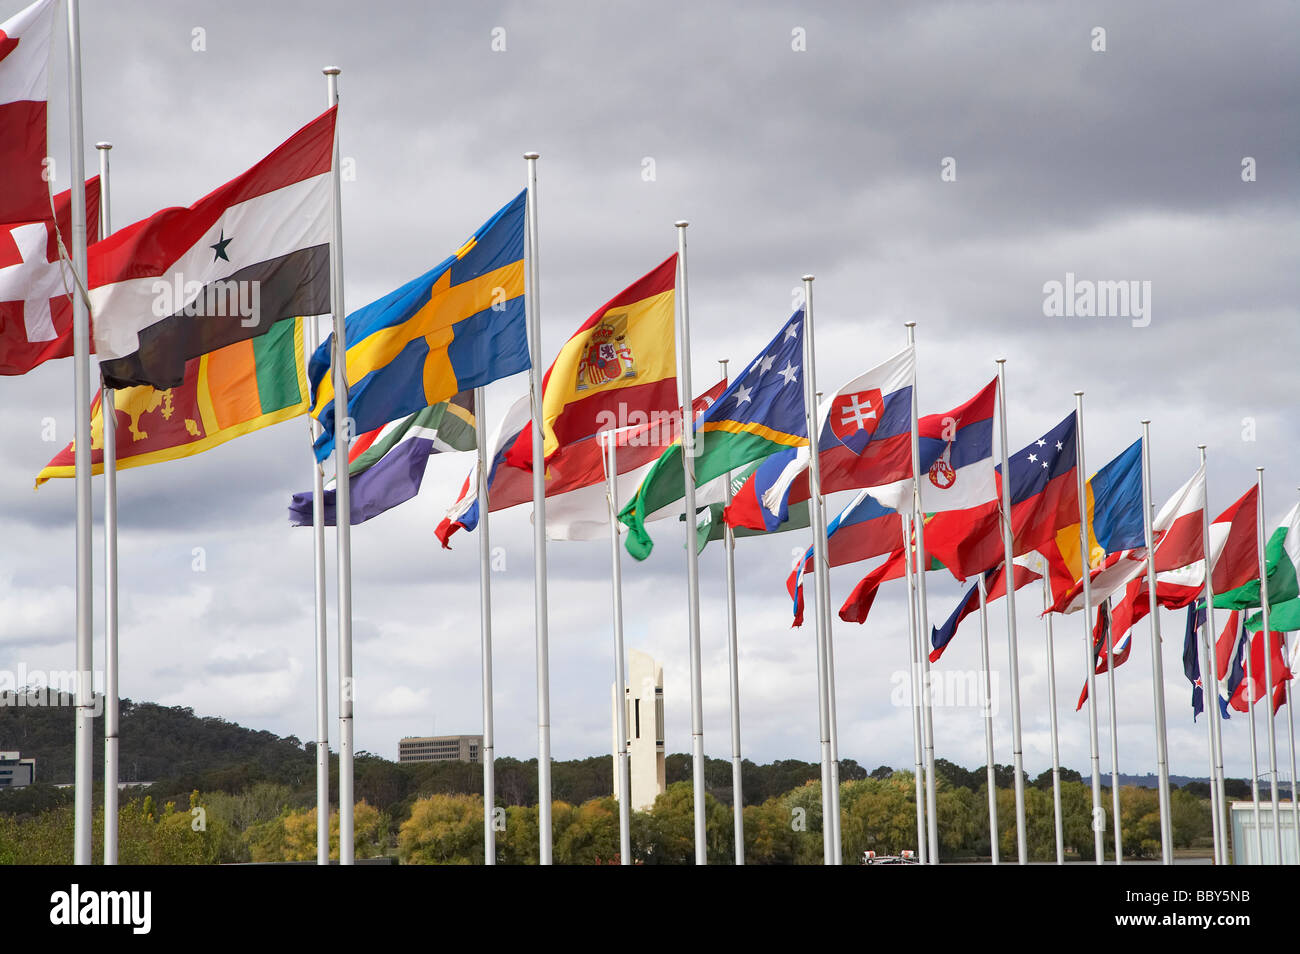 World Flags High Resolution Stock Photography and Images - Alamy